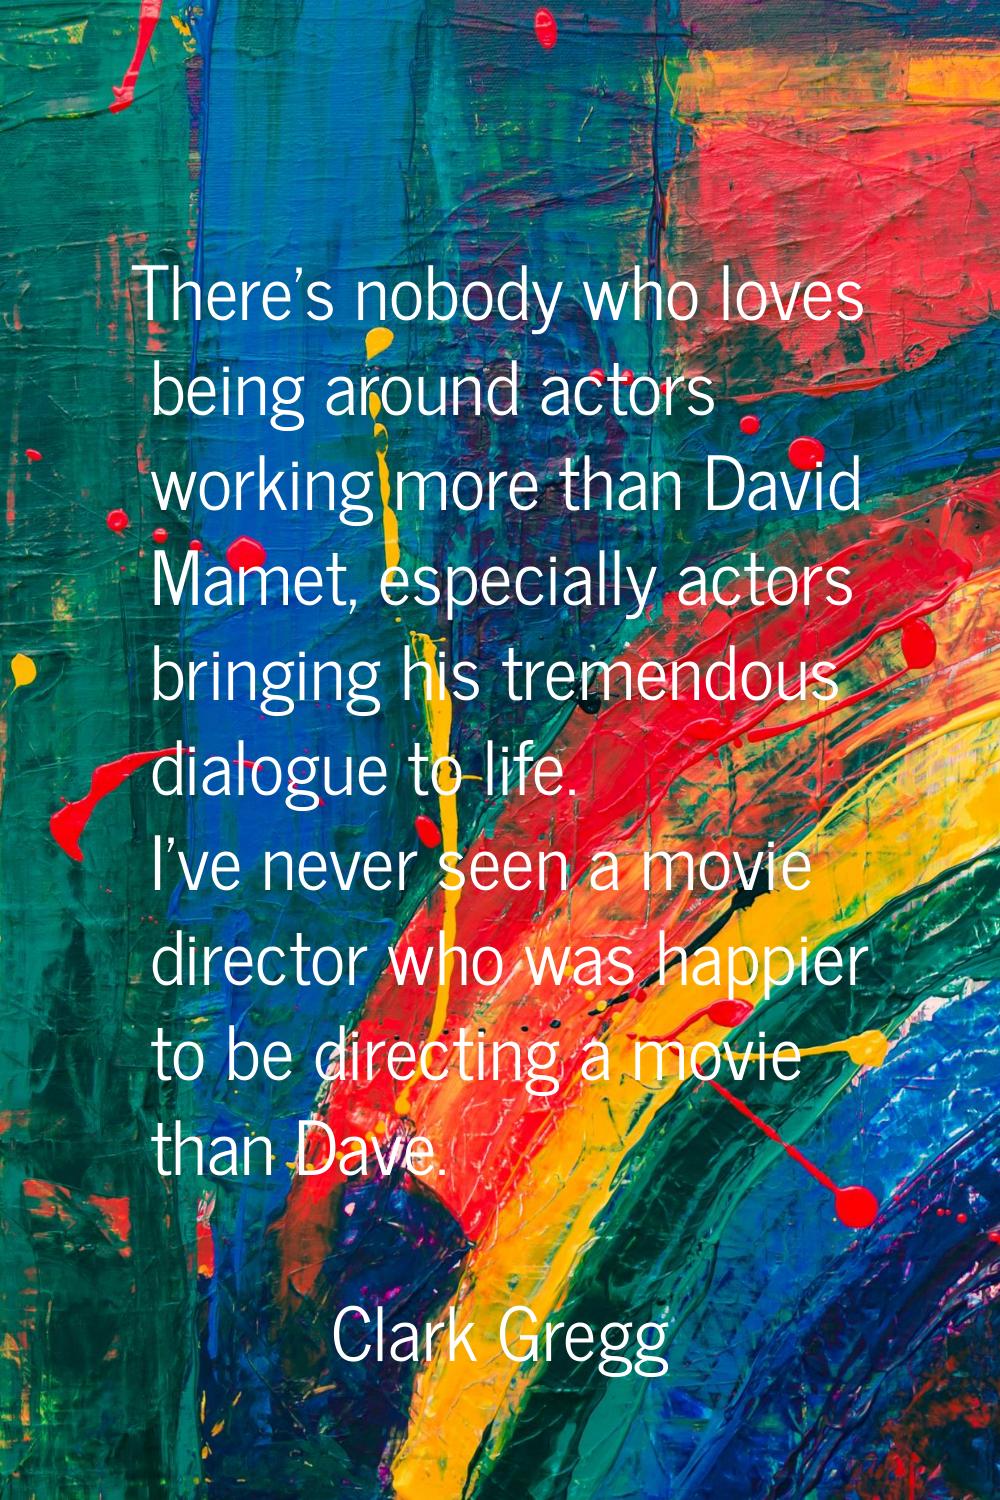 There's nobody who loves being around actors working more than David Mamet, especially actors bring